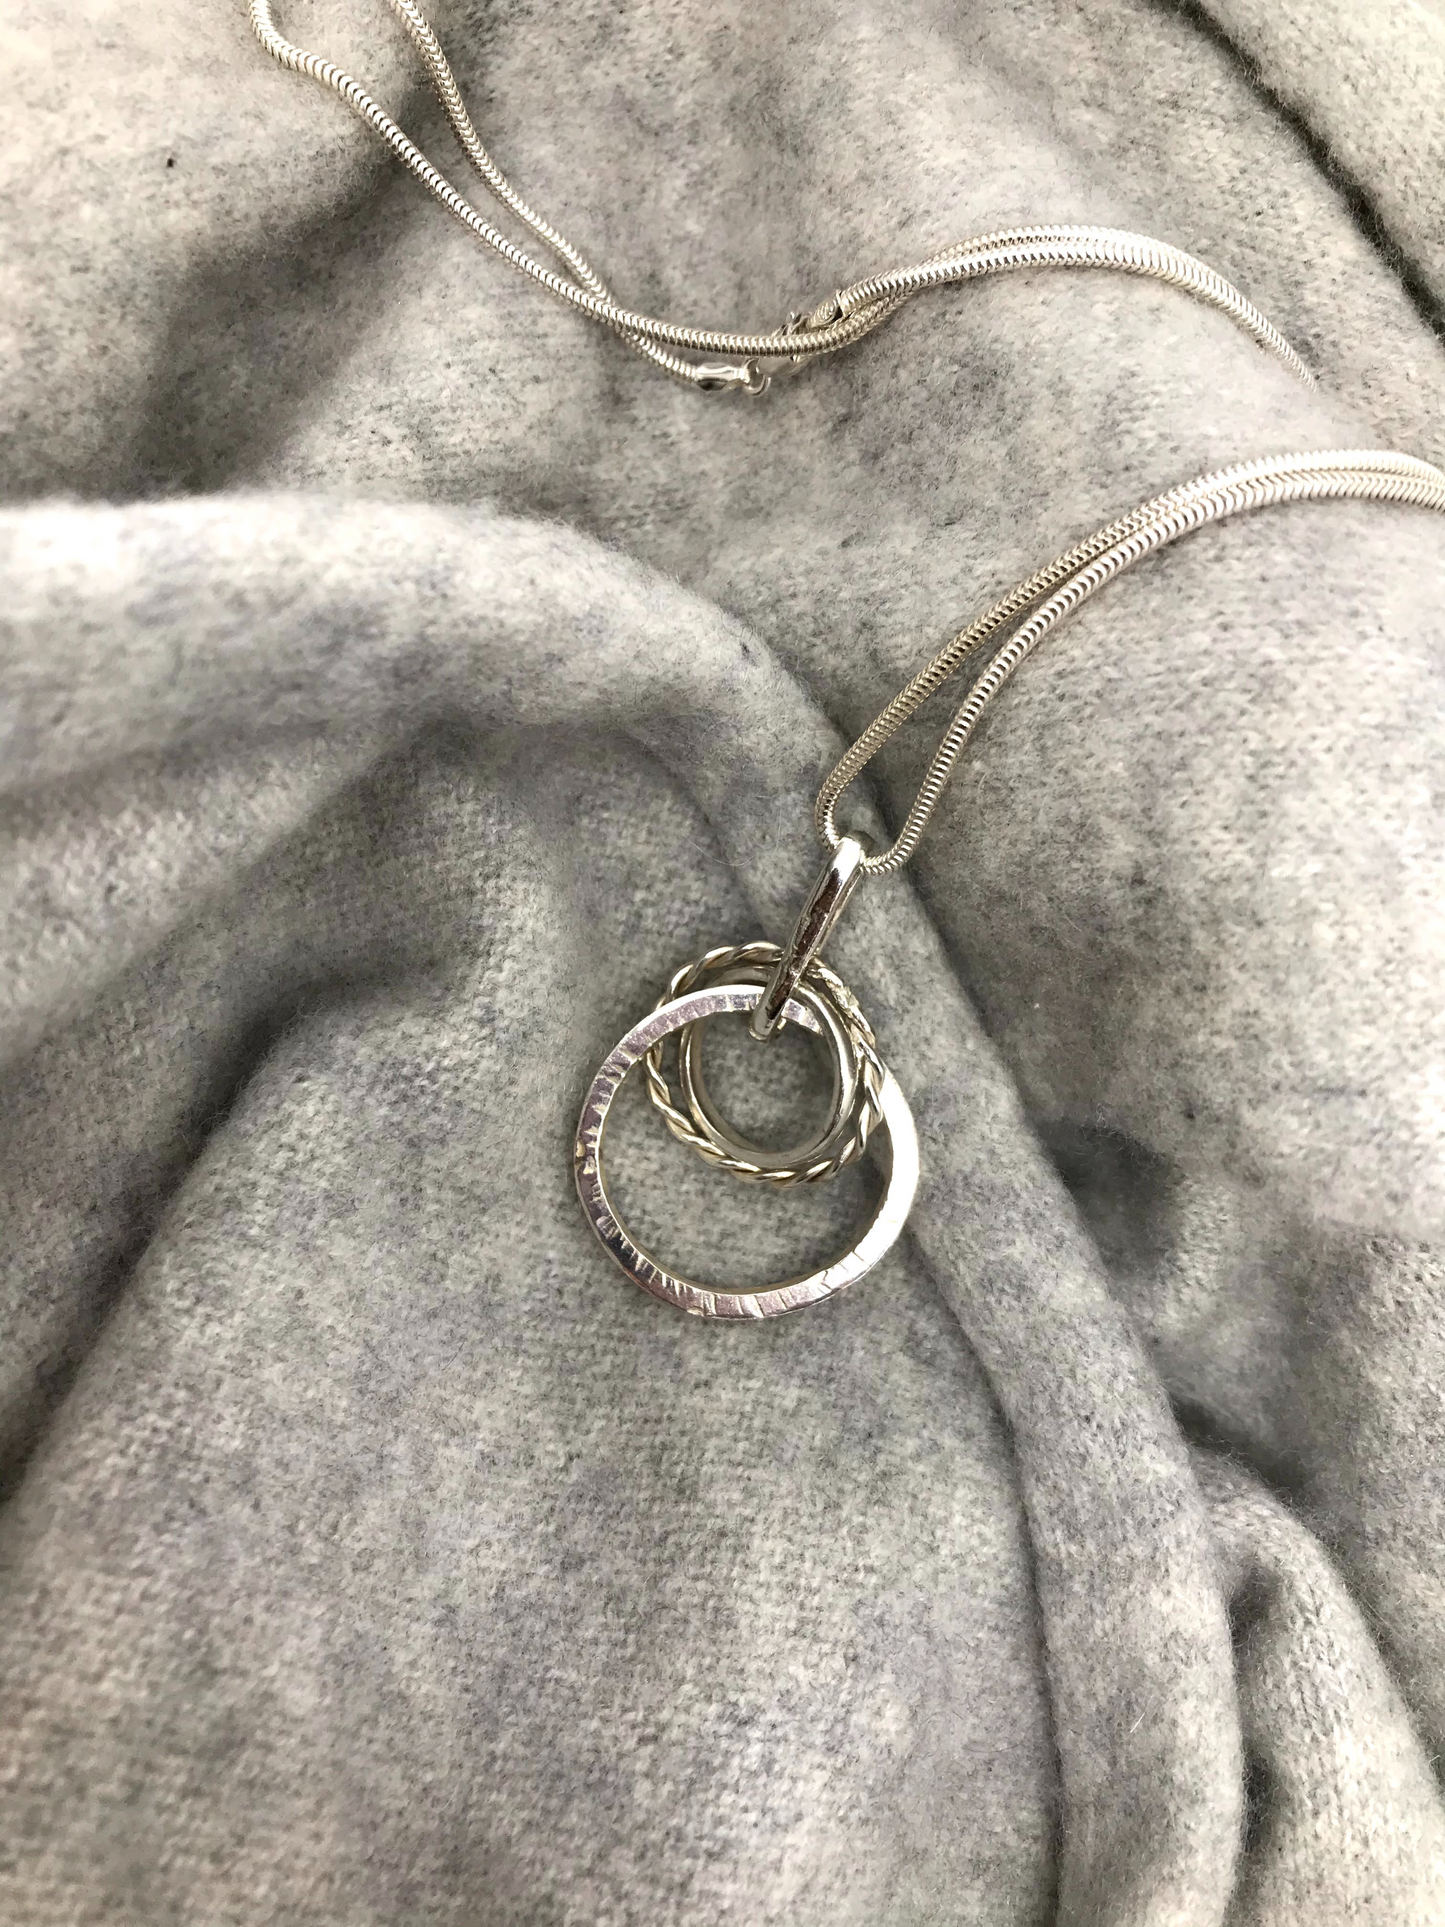 three circles intertwined twisted hammered and mirror 40cm snake chain sterling silverSterling silver mixed loop necklace.  Three circles of silver. One hammered, one twisted and one polished. Hangs on a sterling silver snake chain with a secure 'lobster claw' closing clasp.